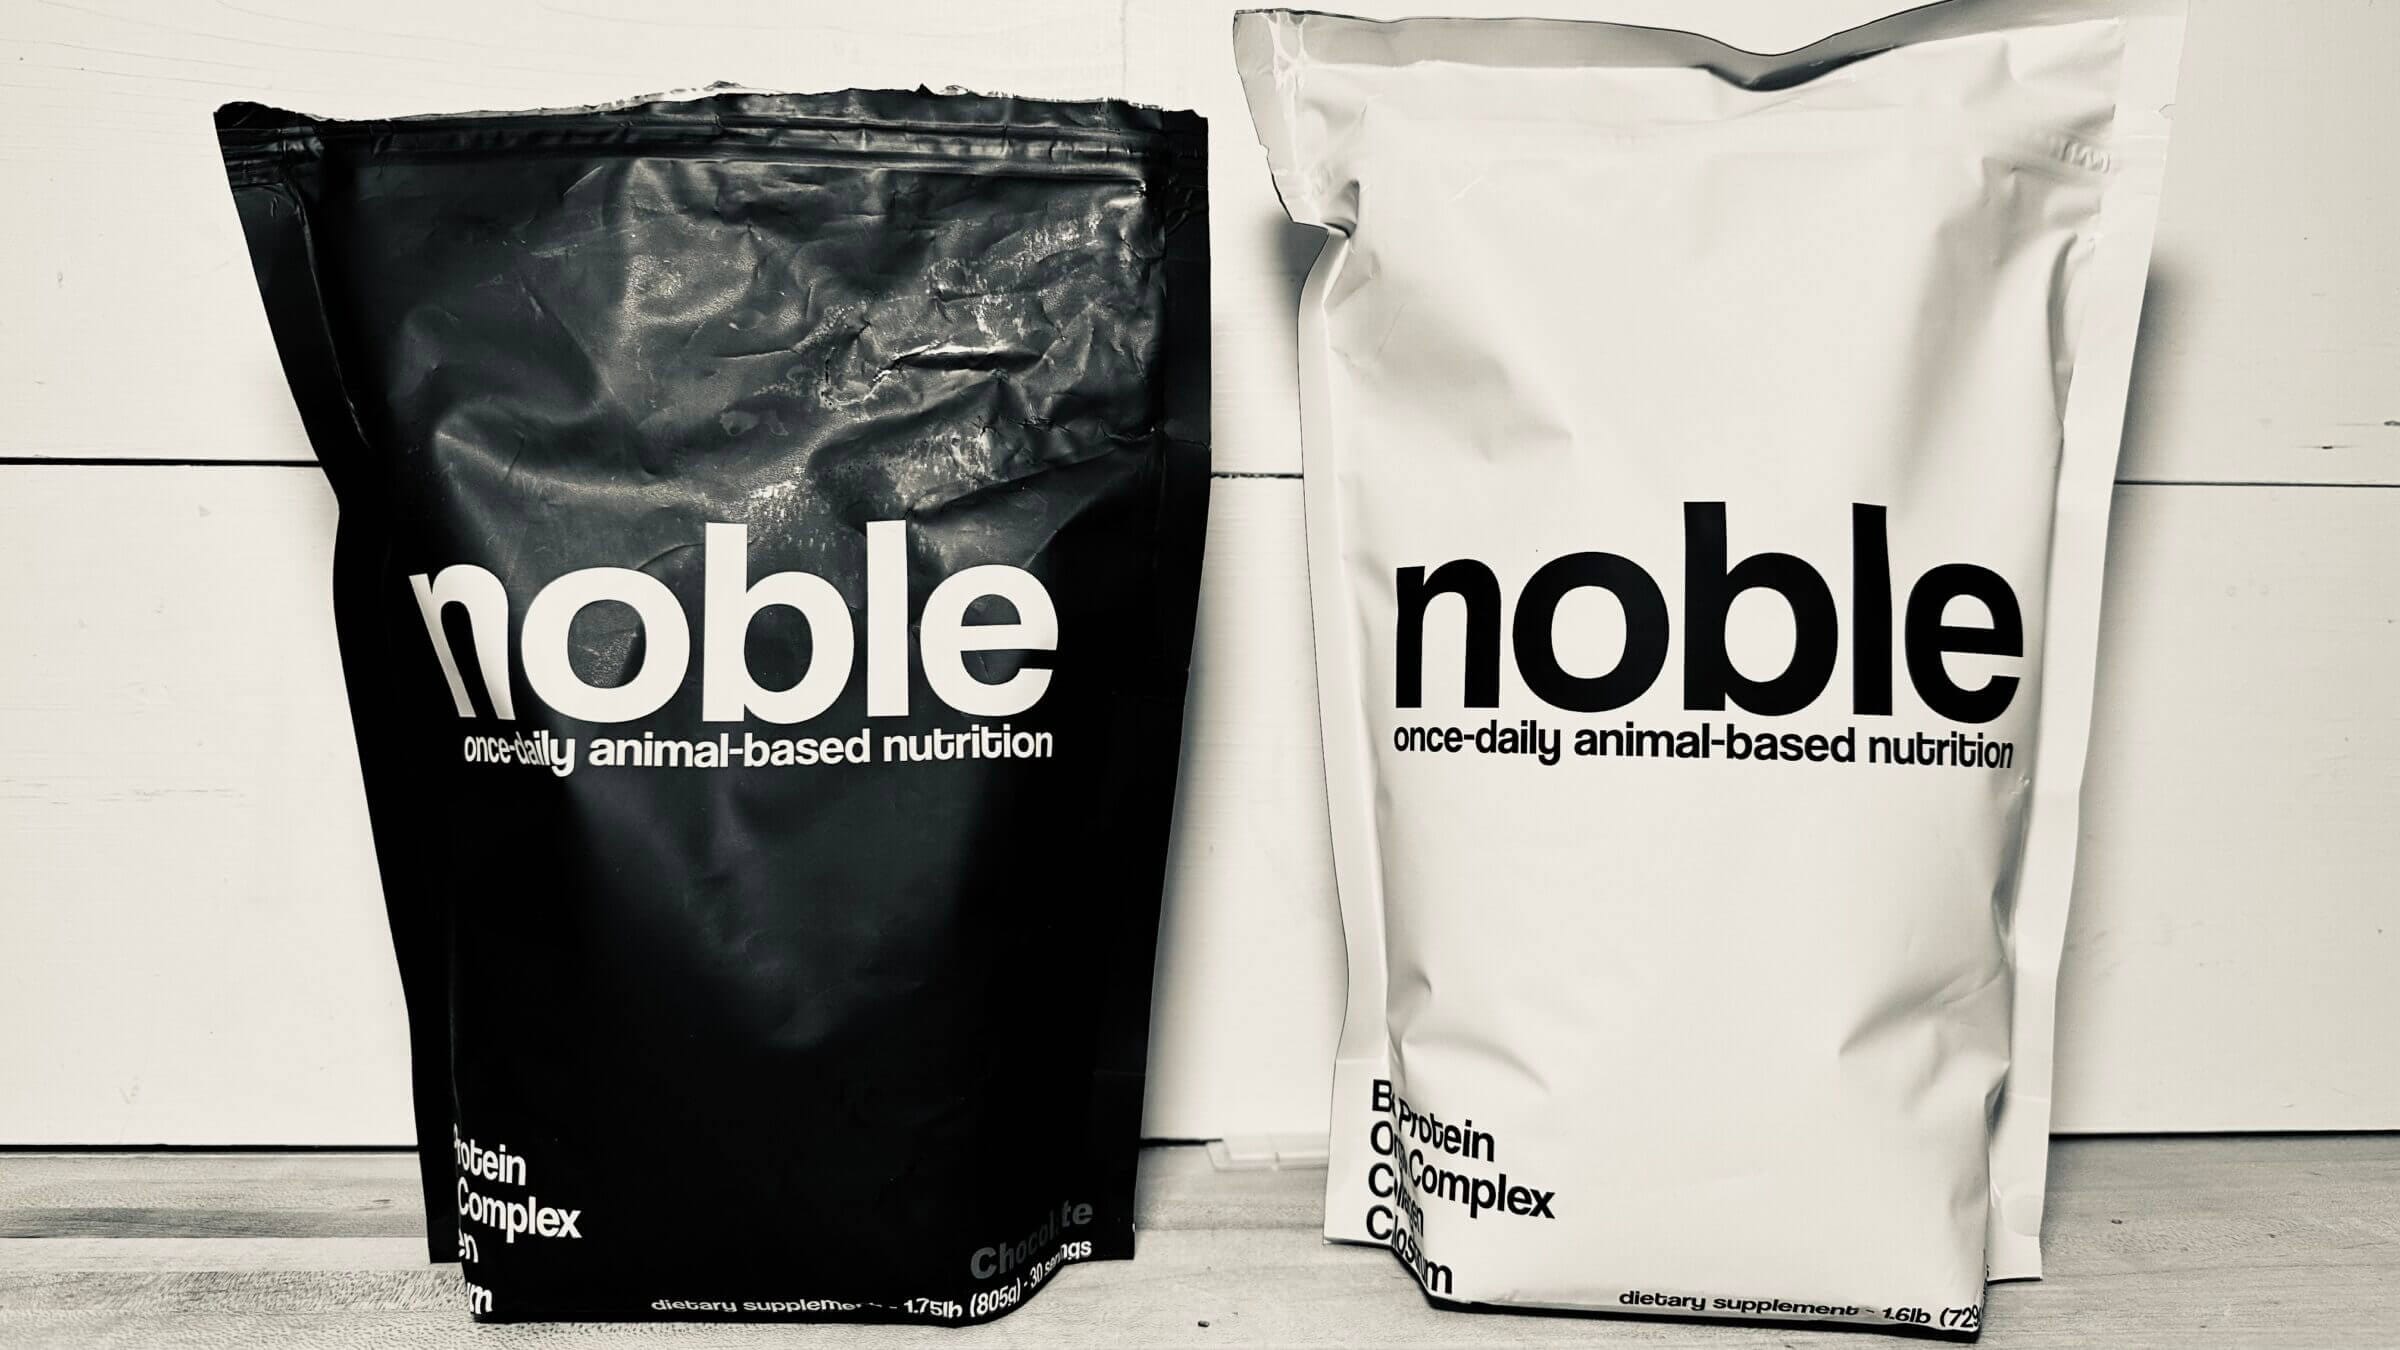 Noble is available in Chocolate and Vanilla flavors.